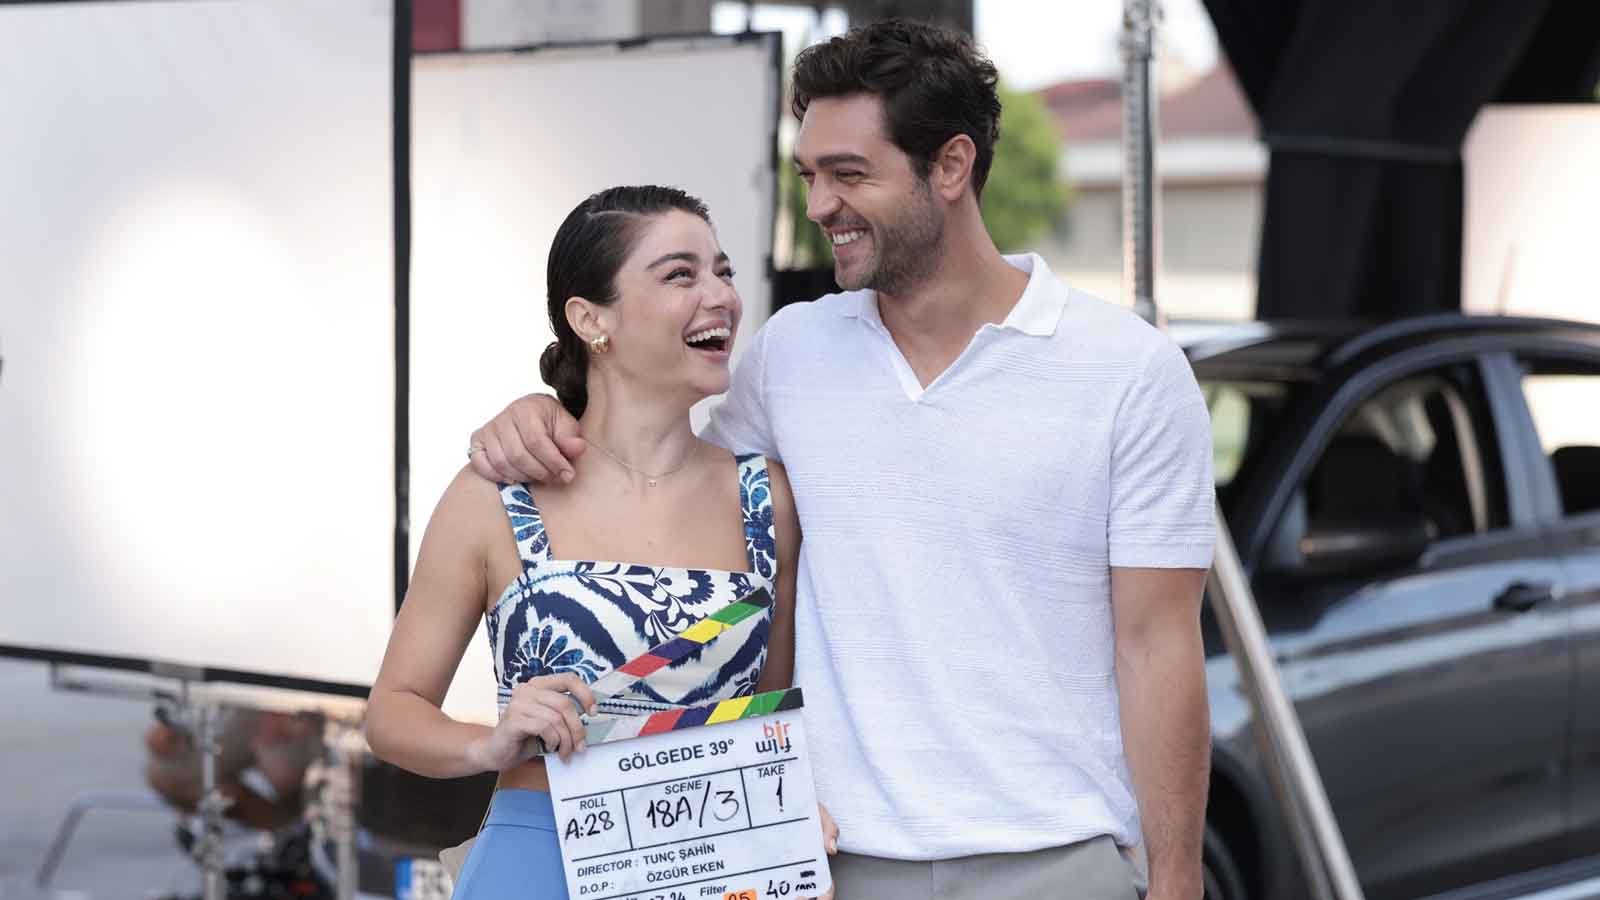 “Gölgede 39 Derece-39 Degrees in the Shade”: A Fast-Paced and Chaotic Romantic Comedy Set in Istanbul and Izmir